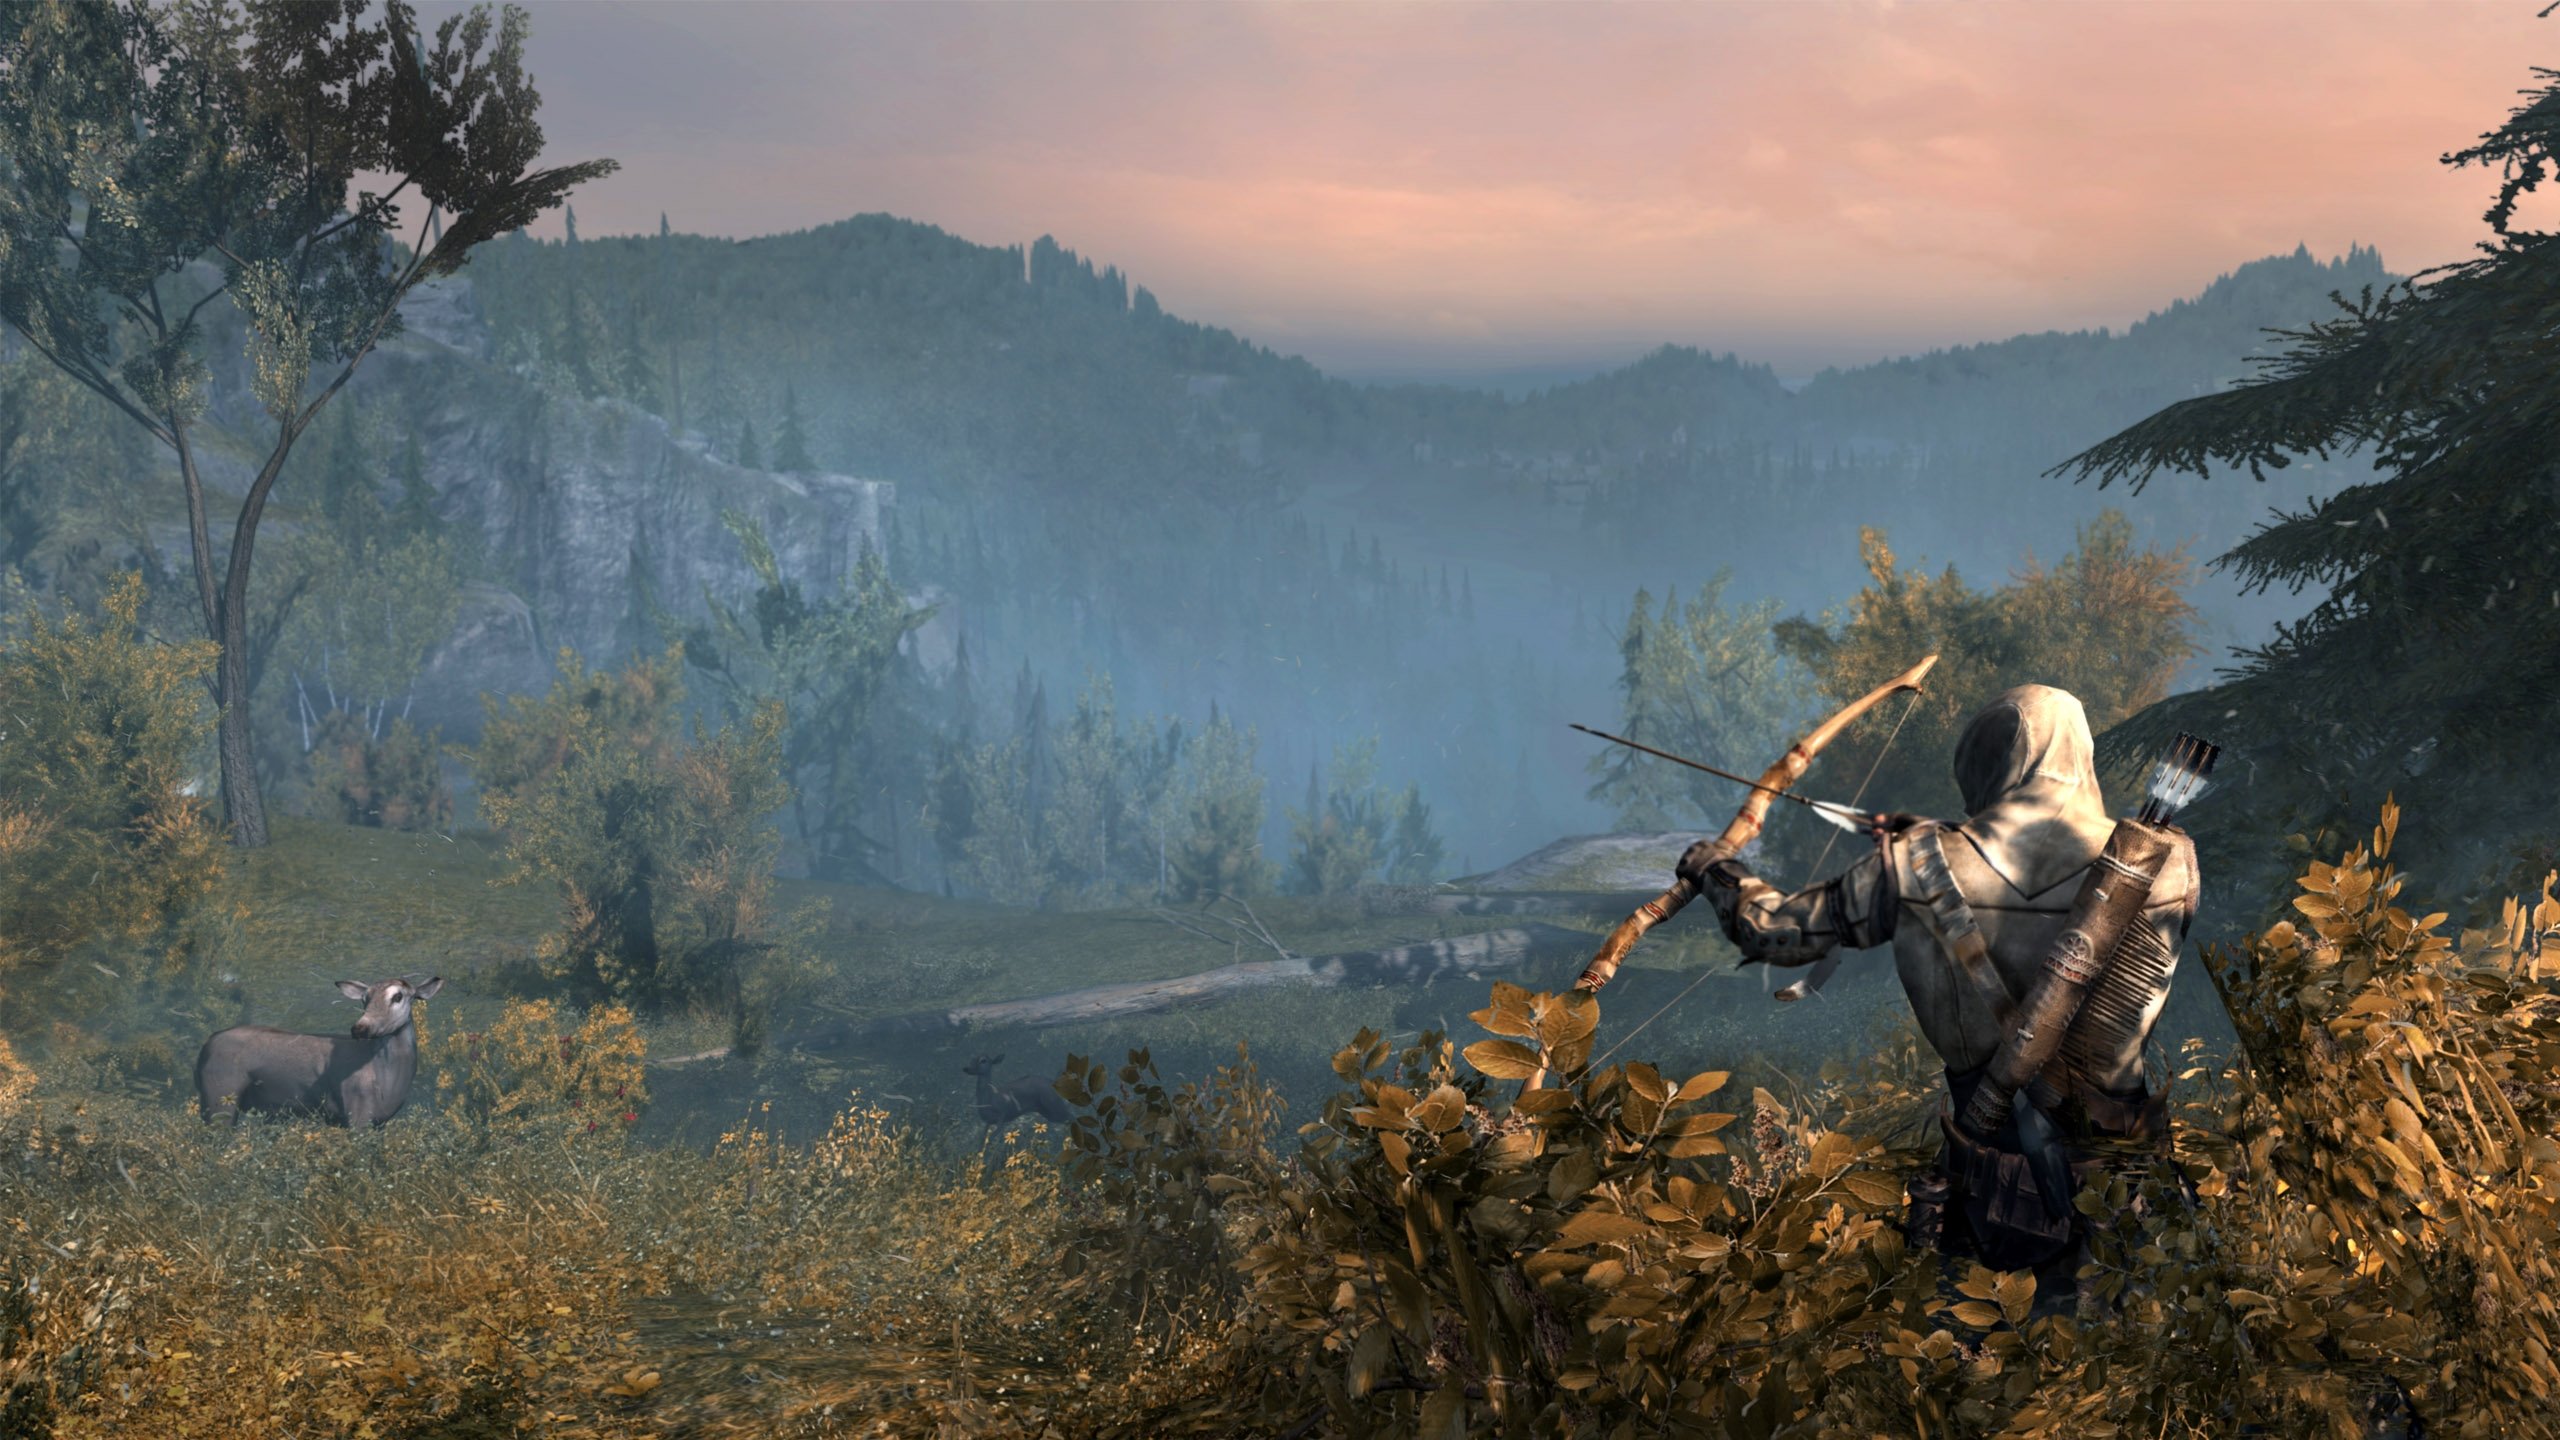 Archery Archer Bow Arrow Hunting Weapon Assassins Creed Wallpaper